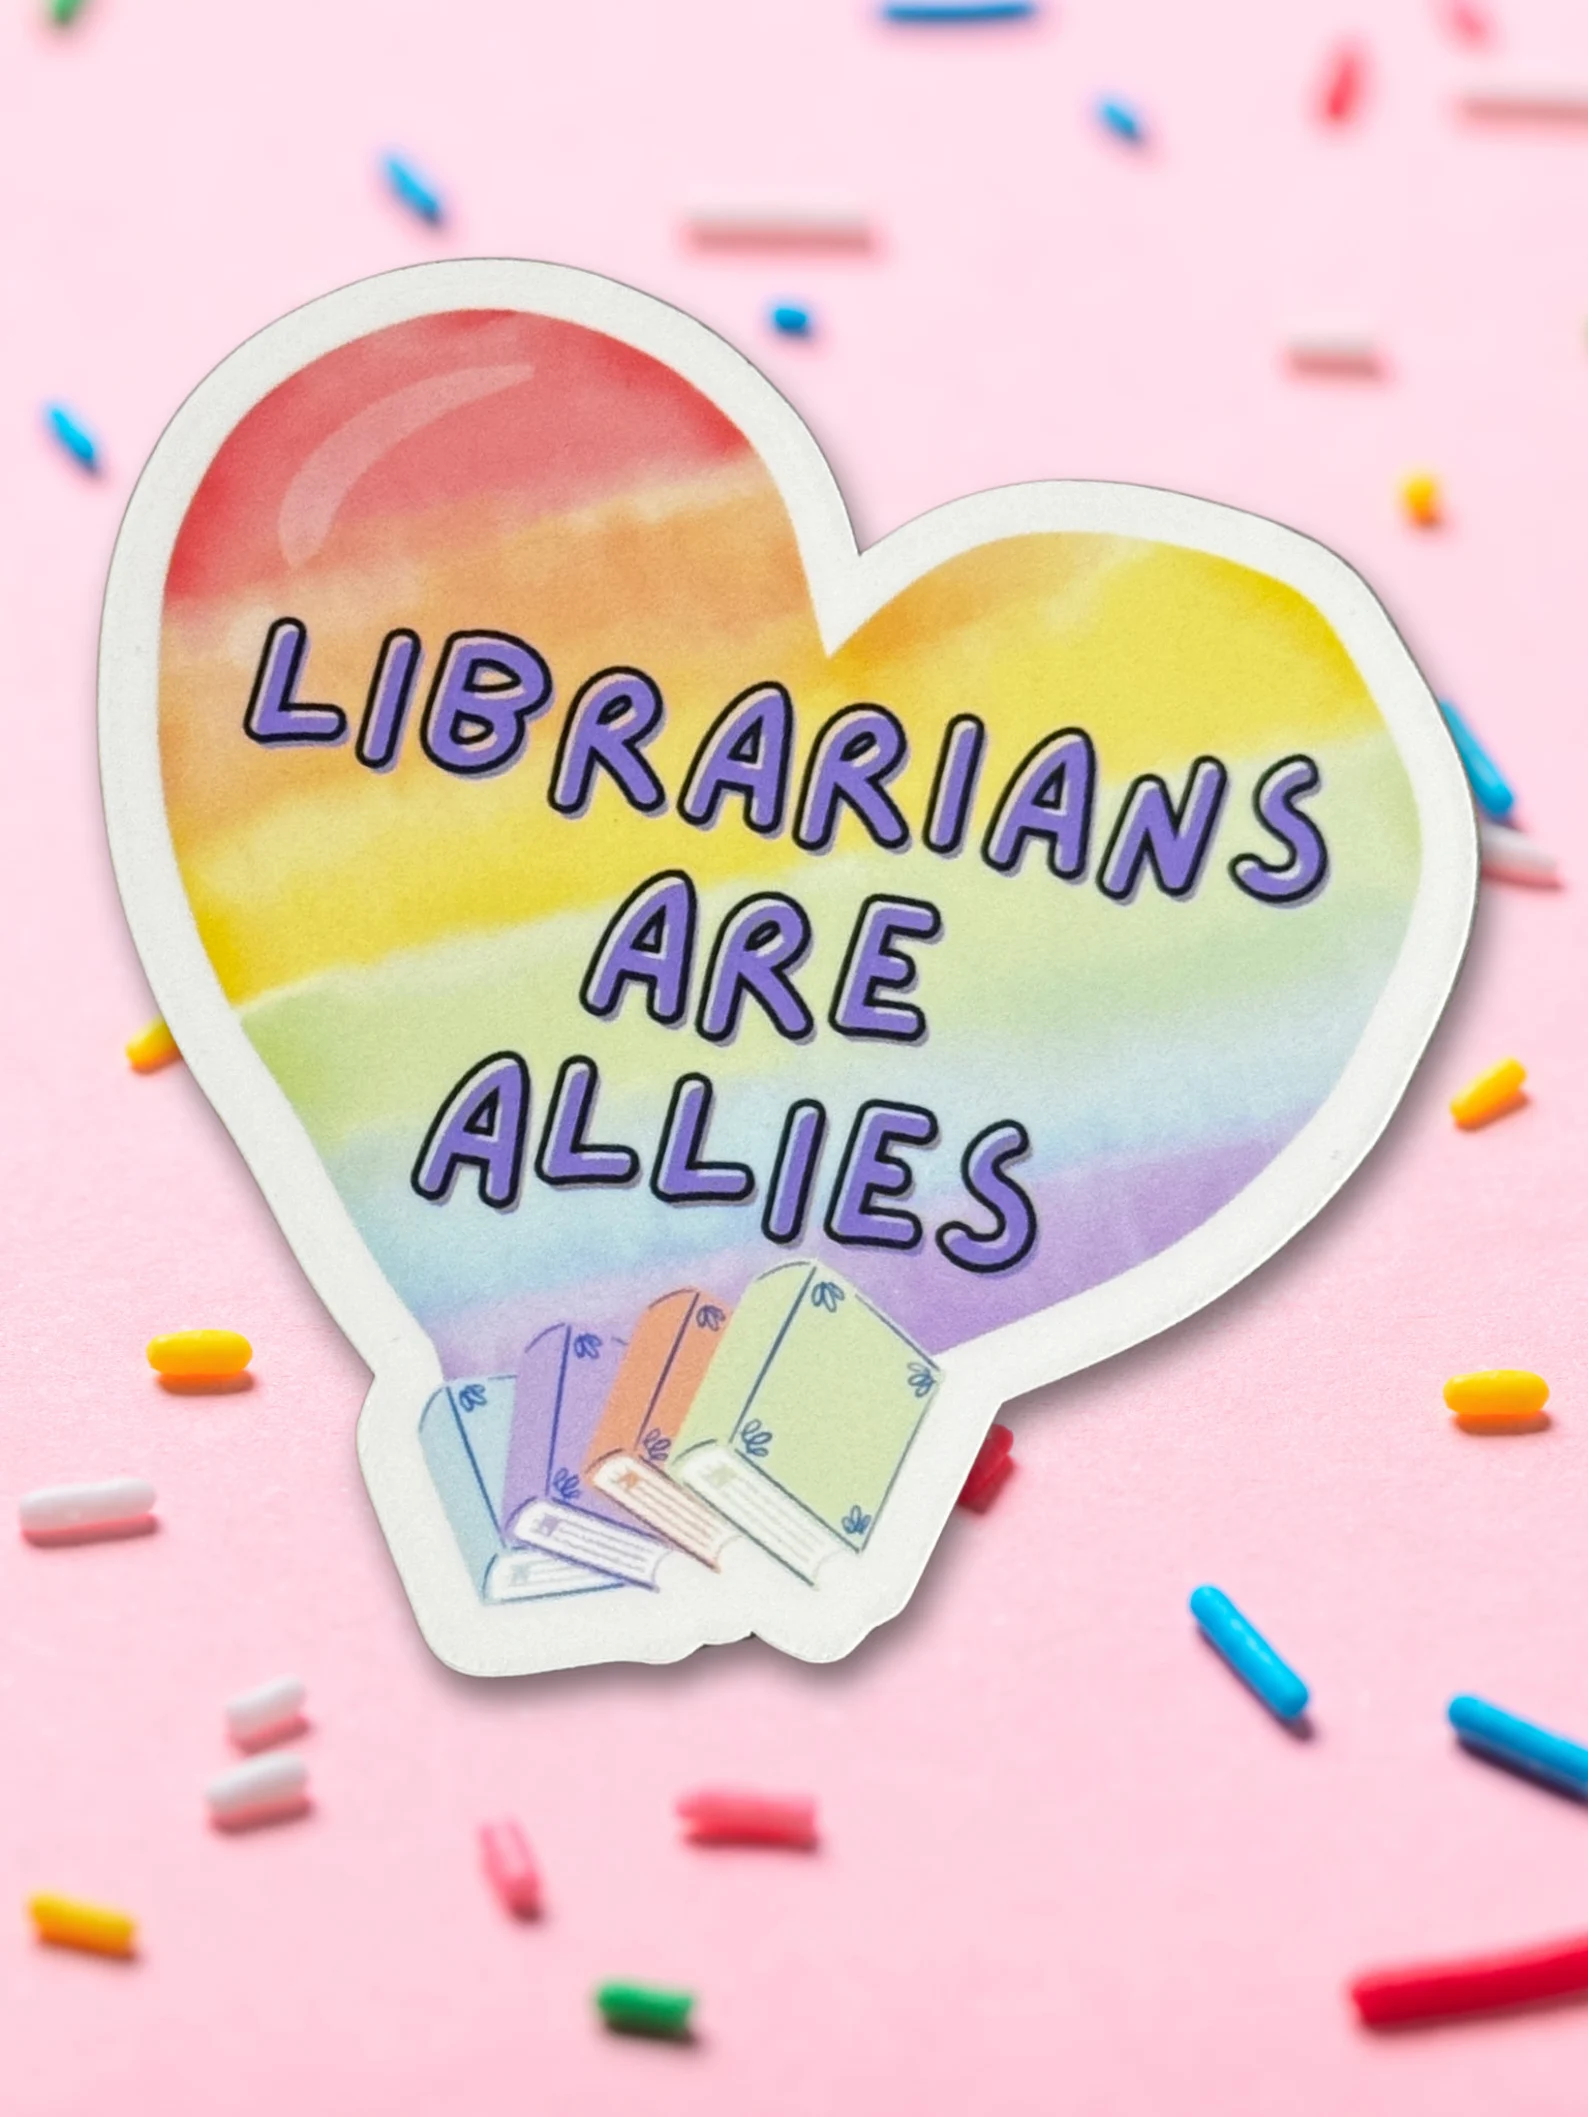 rainbow heart sticker that says librarians are allies.